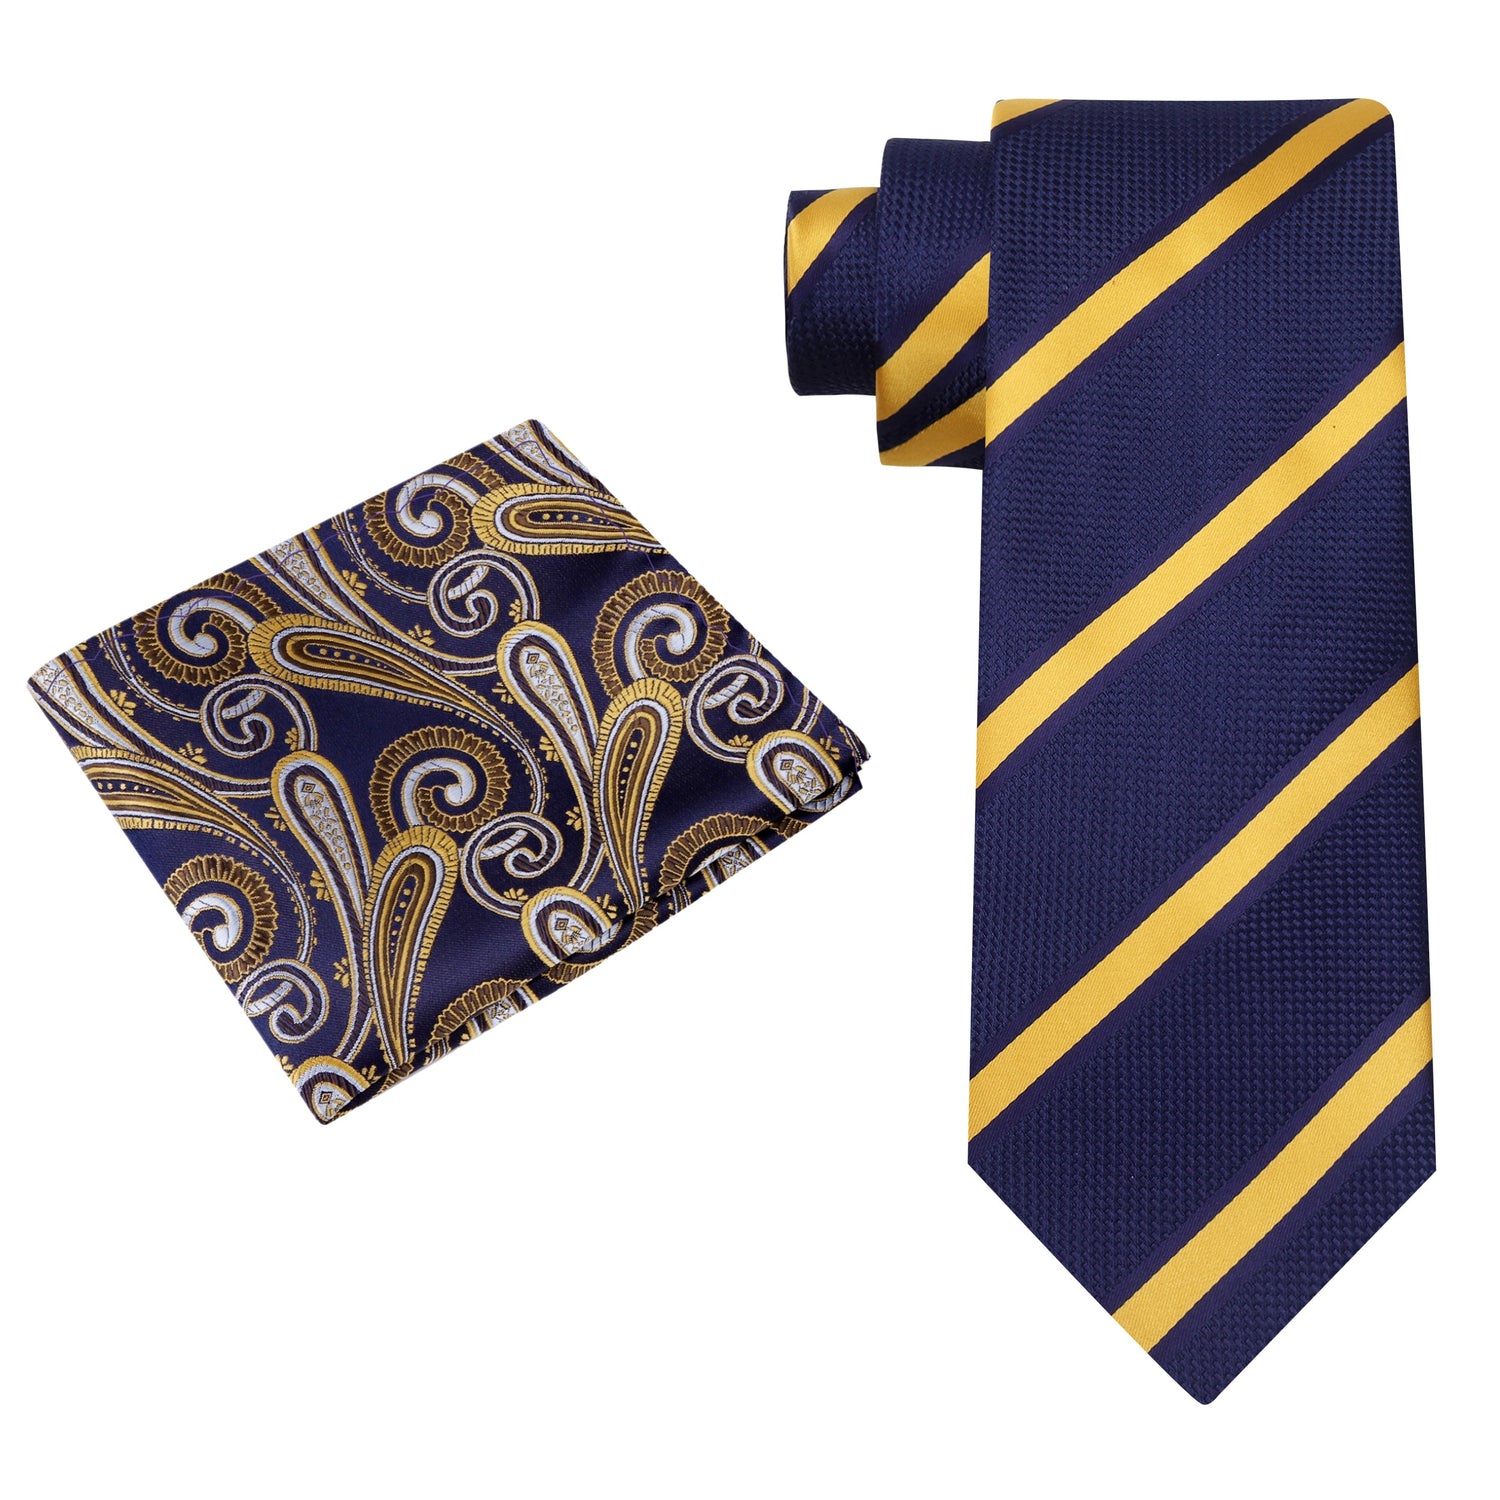 Alt View: Blue, Yellow Stripe Tie and Accenting Blue Gold Square